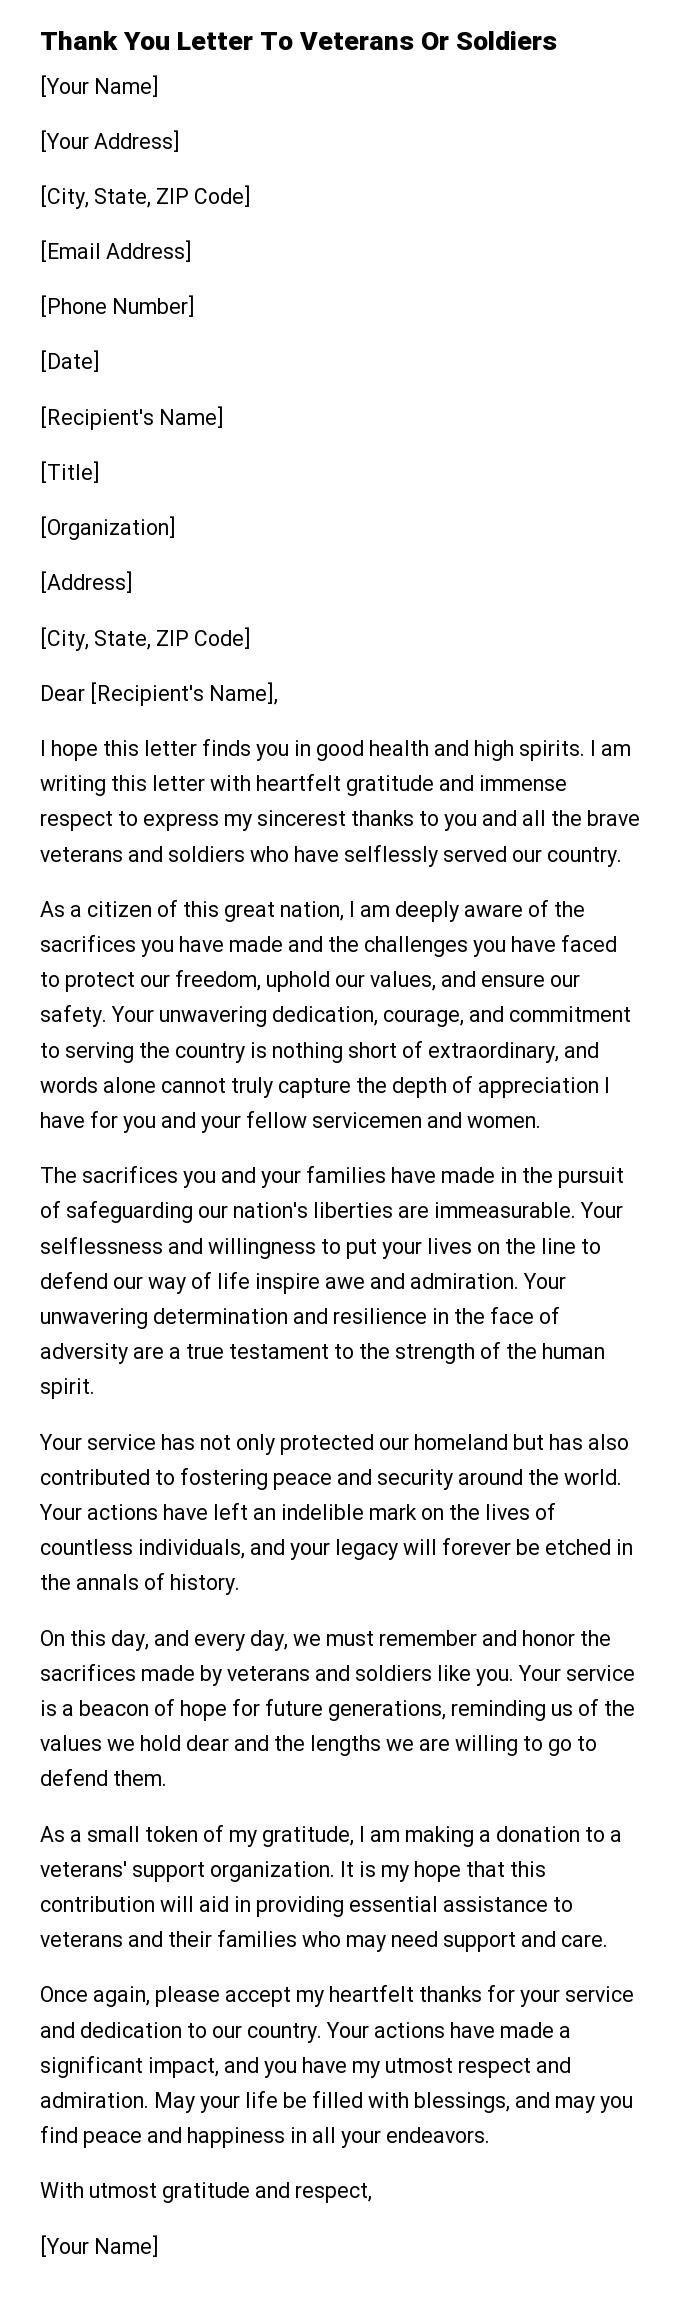 Thank You Letter To Veterans Or Soldiers